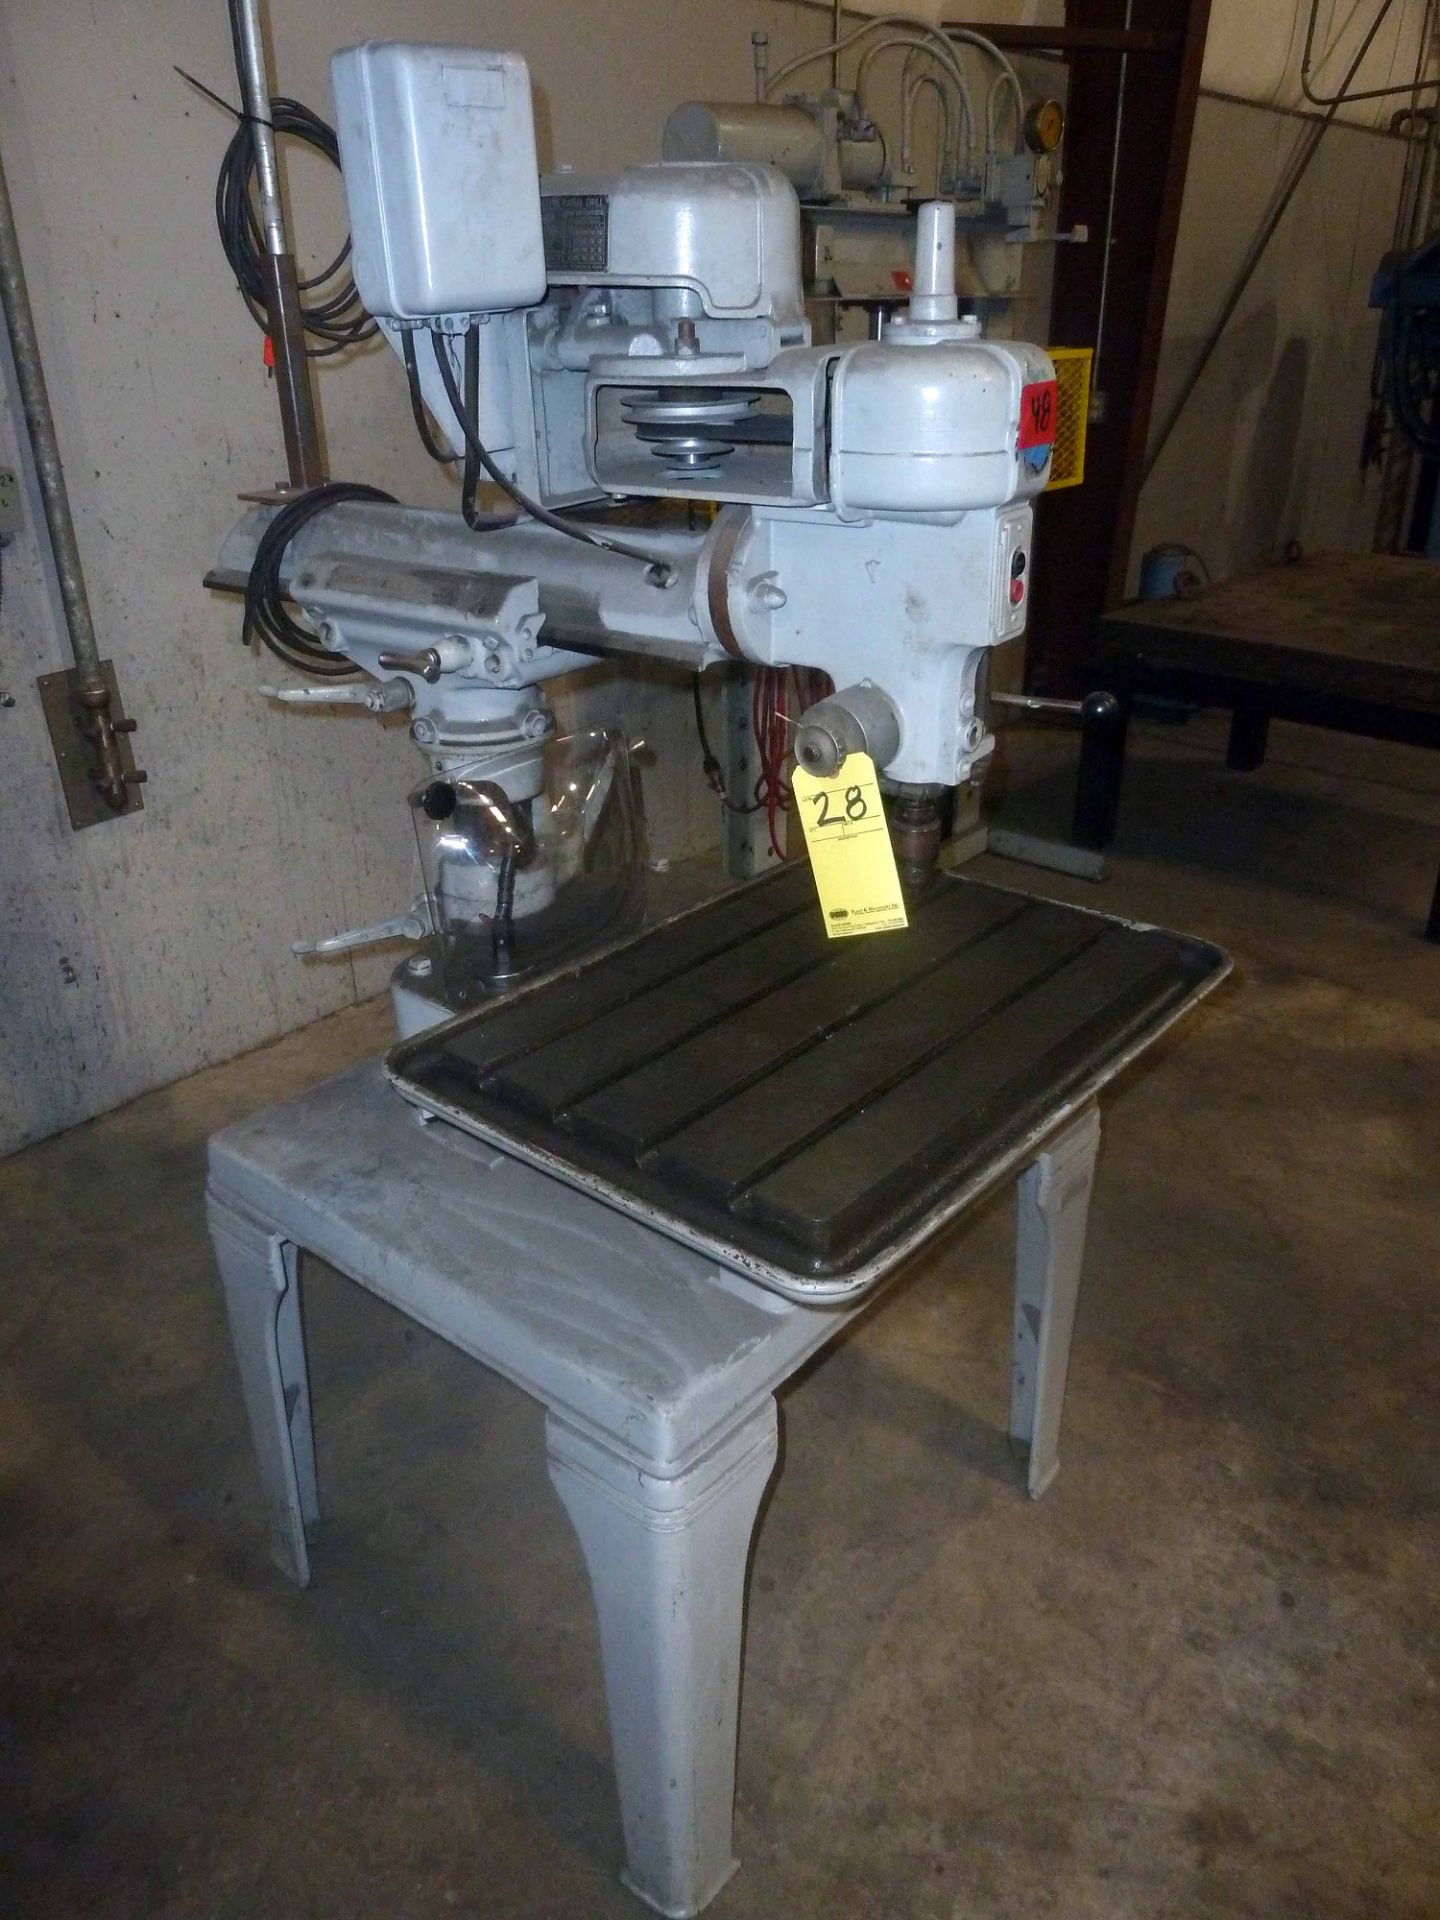 RAM TYPE RADIAL DRILL, ROCKWELL/DELTA MDL. 15-20, spds: 175-8250 RPM, 26" x 18" table, S/N